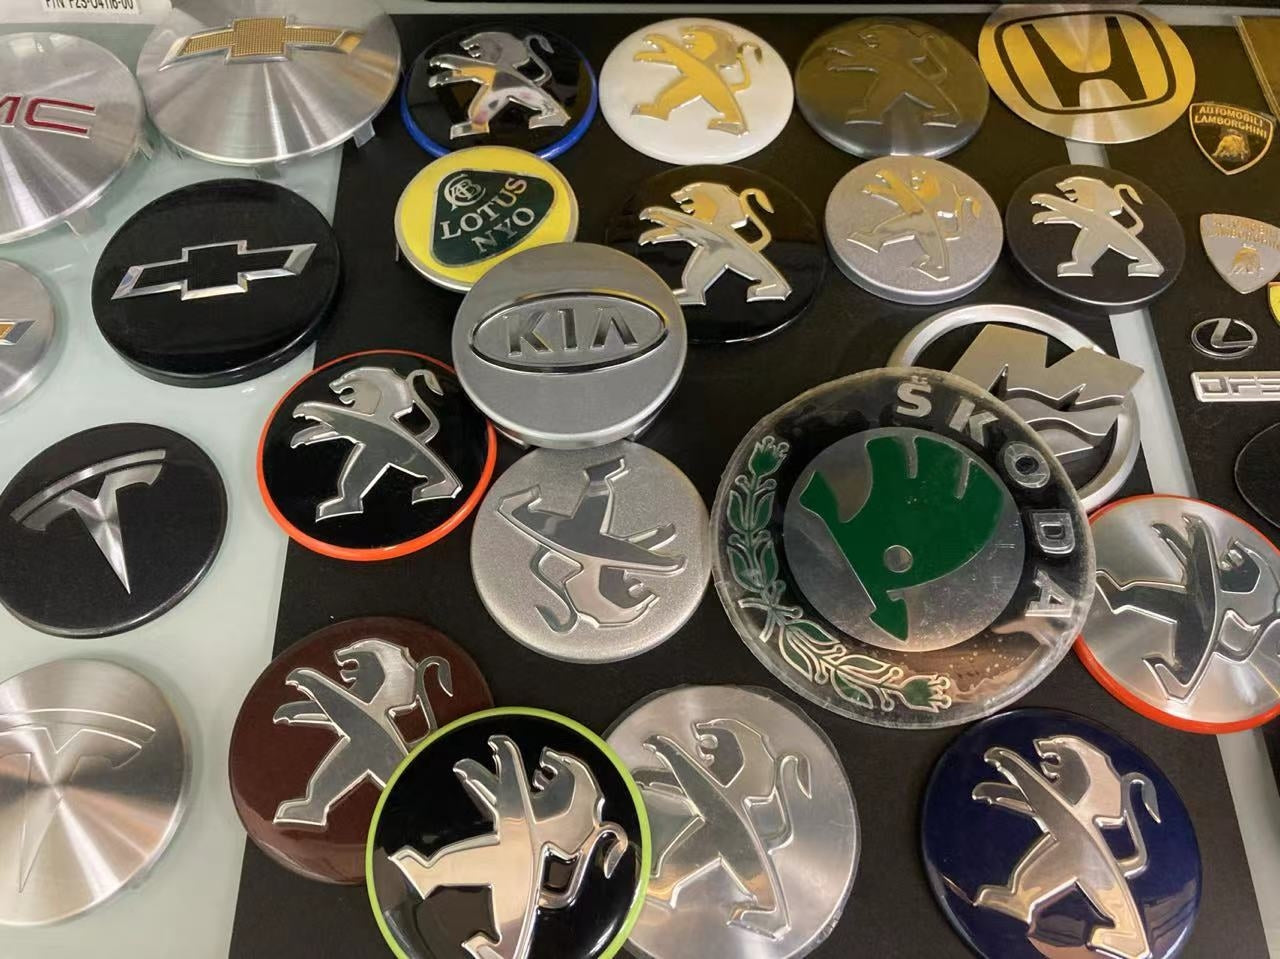 A collection of oem car badges